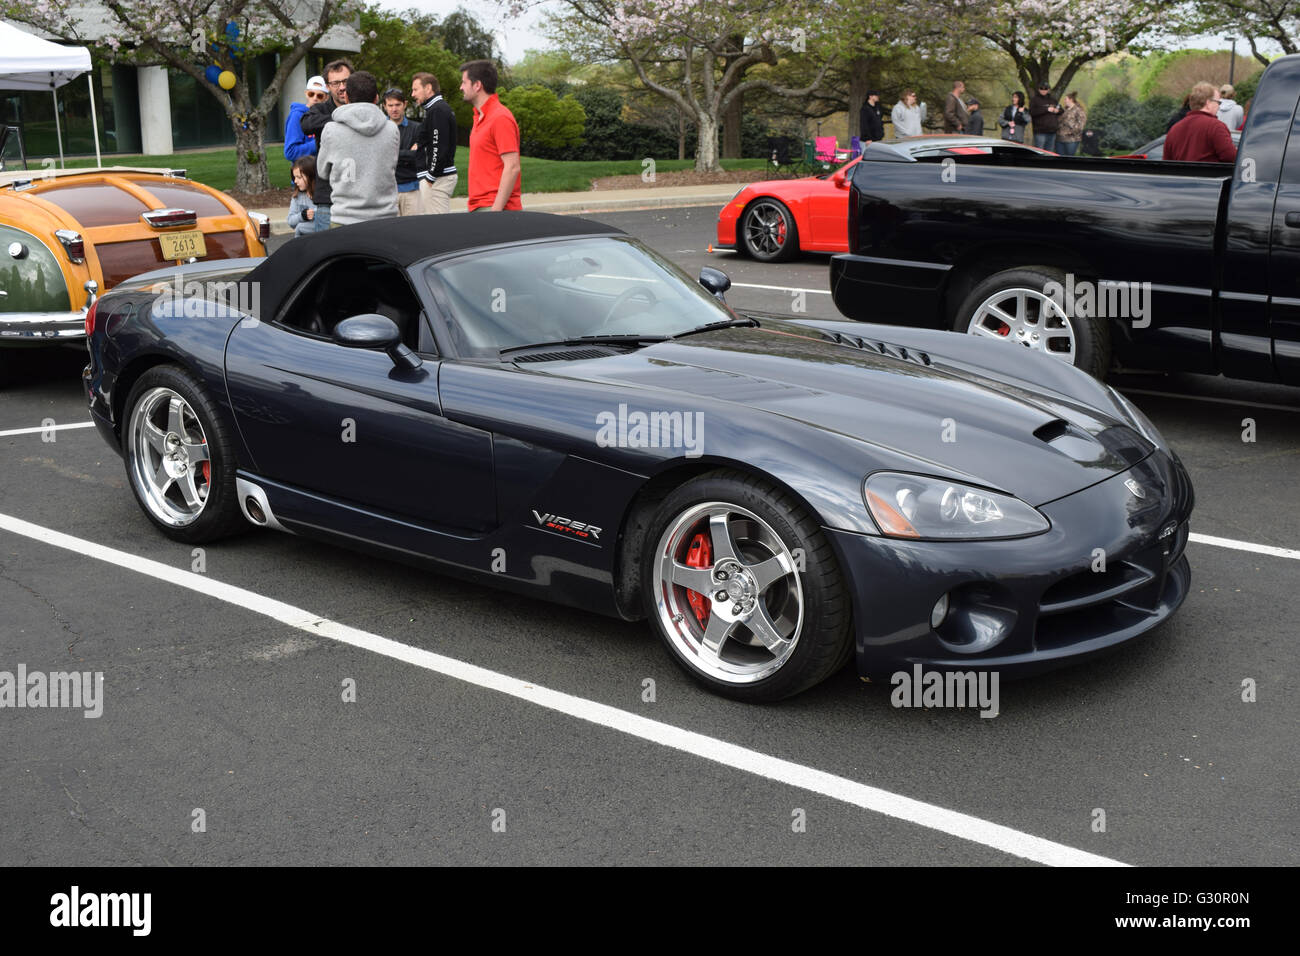 A Dodge Viper on display at a local car show. Stock Photo